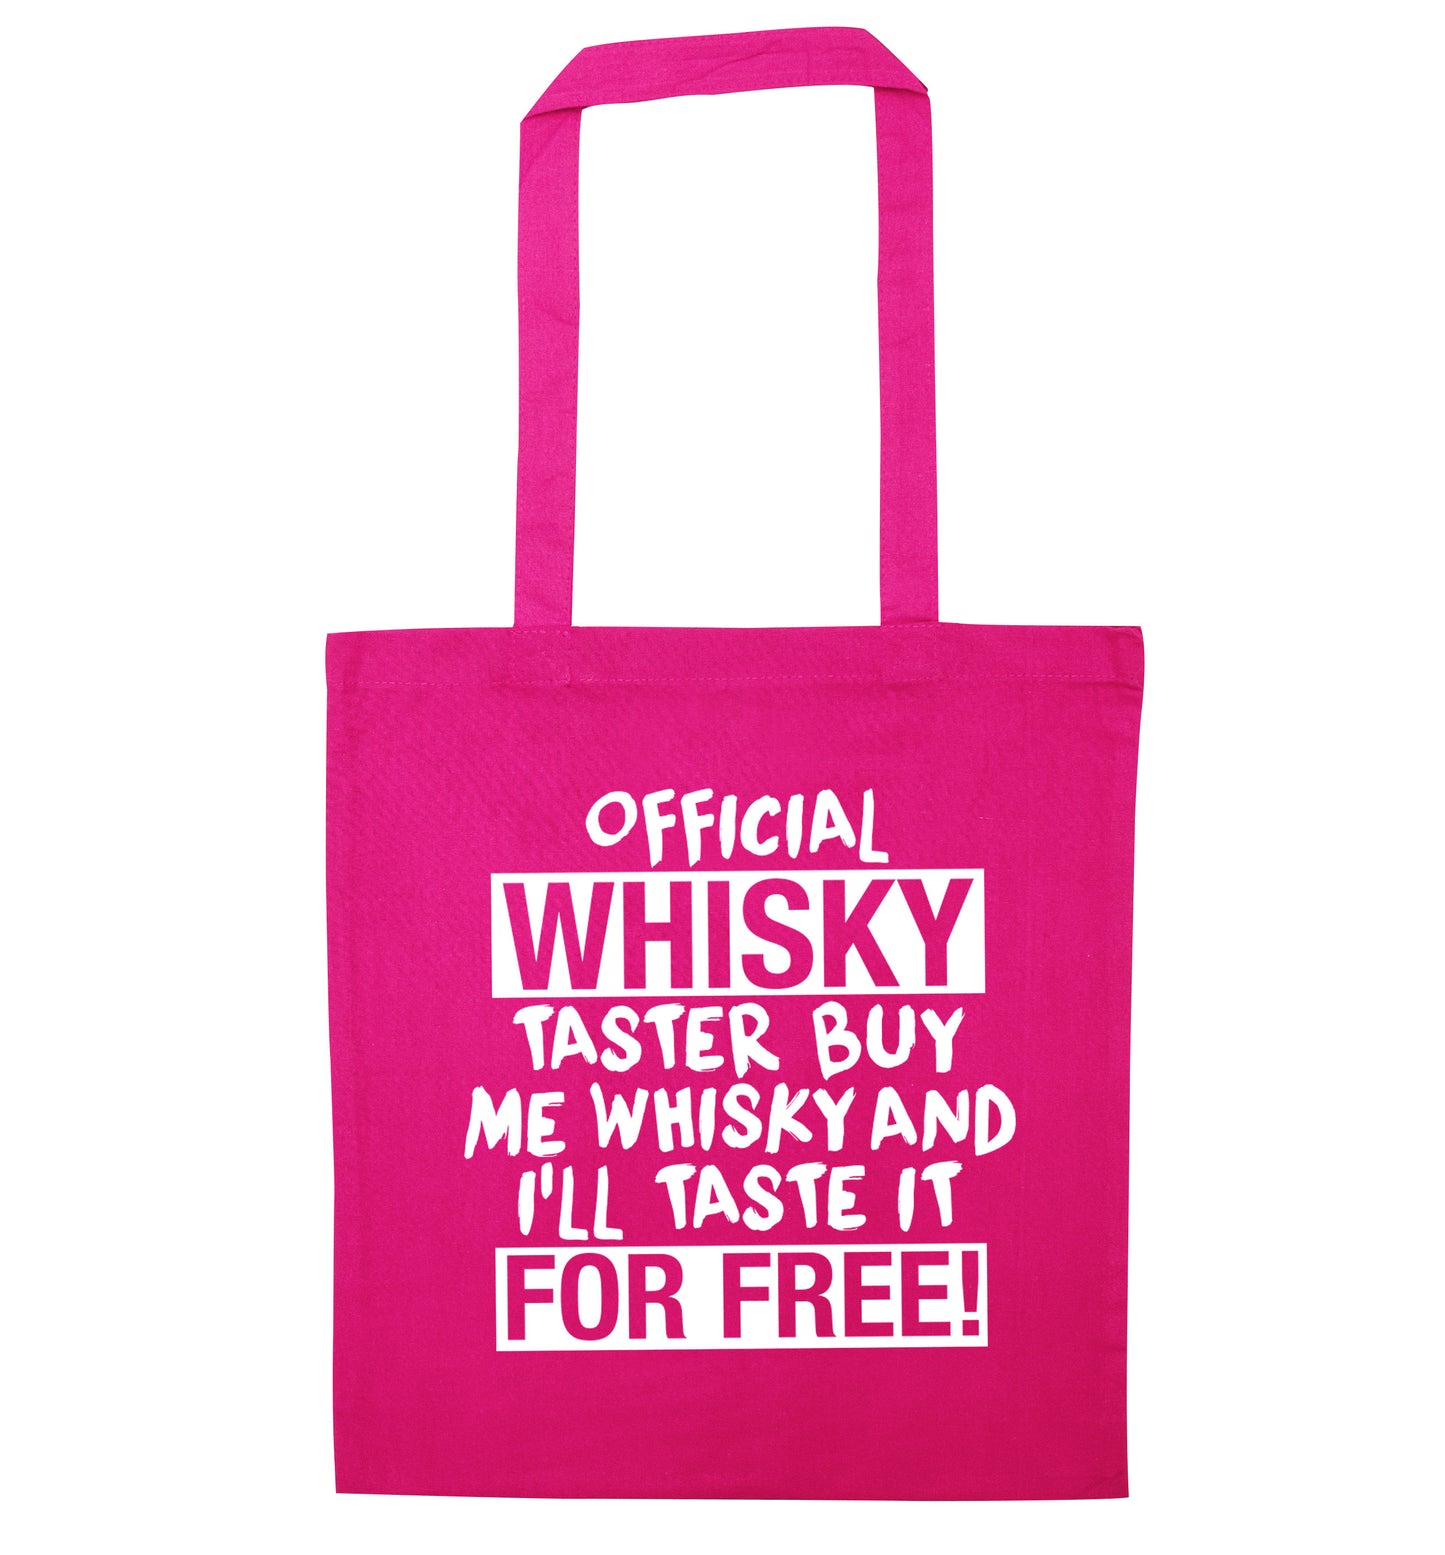 Official whisky taster buy me whisky and I'll taste it for free pink tote bag